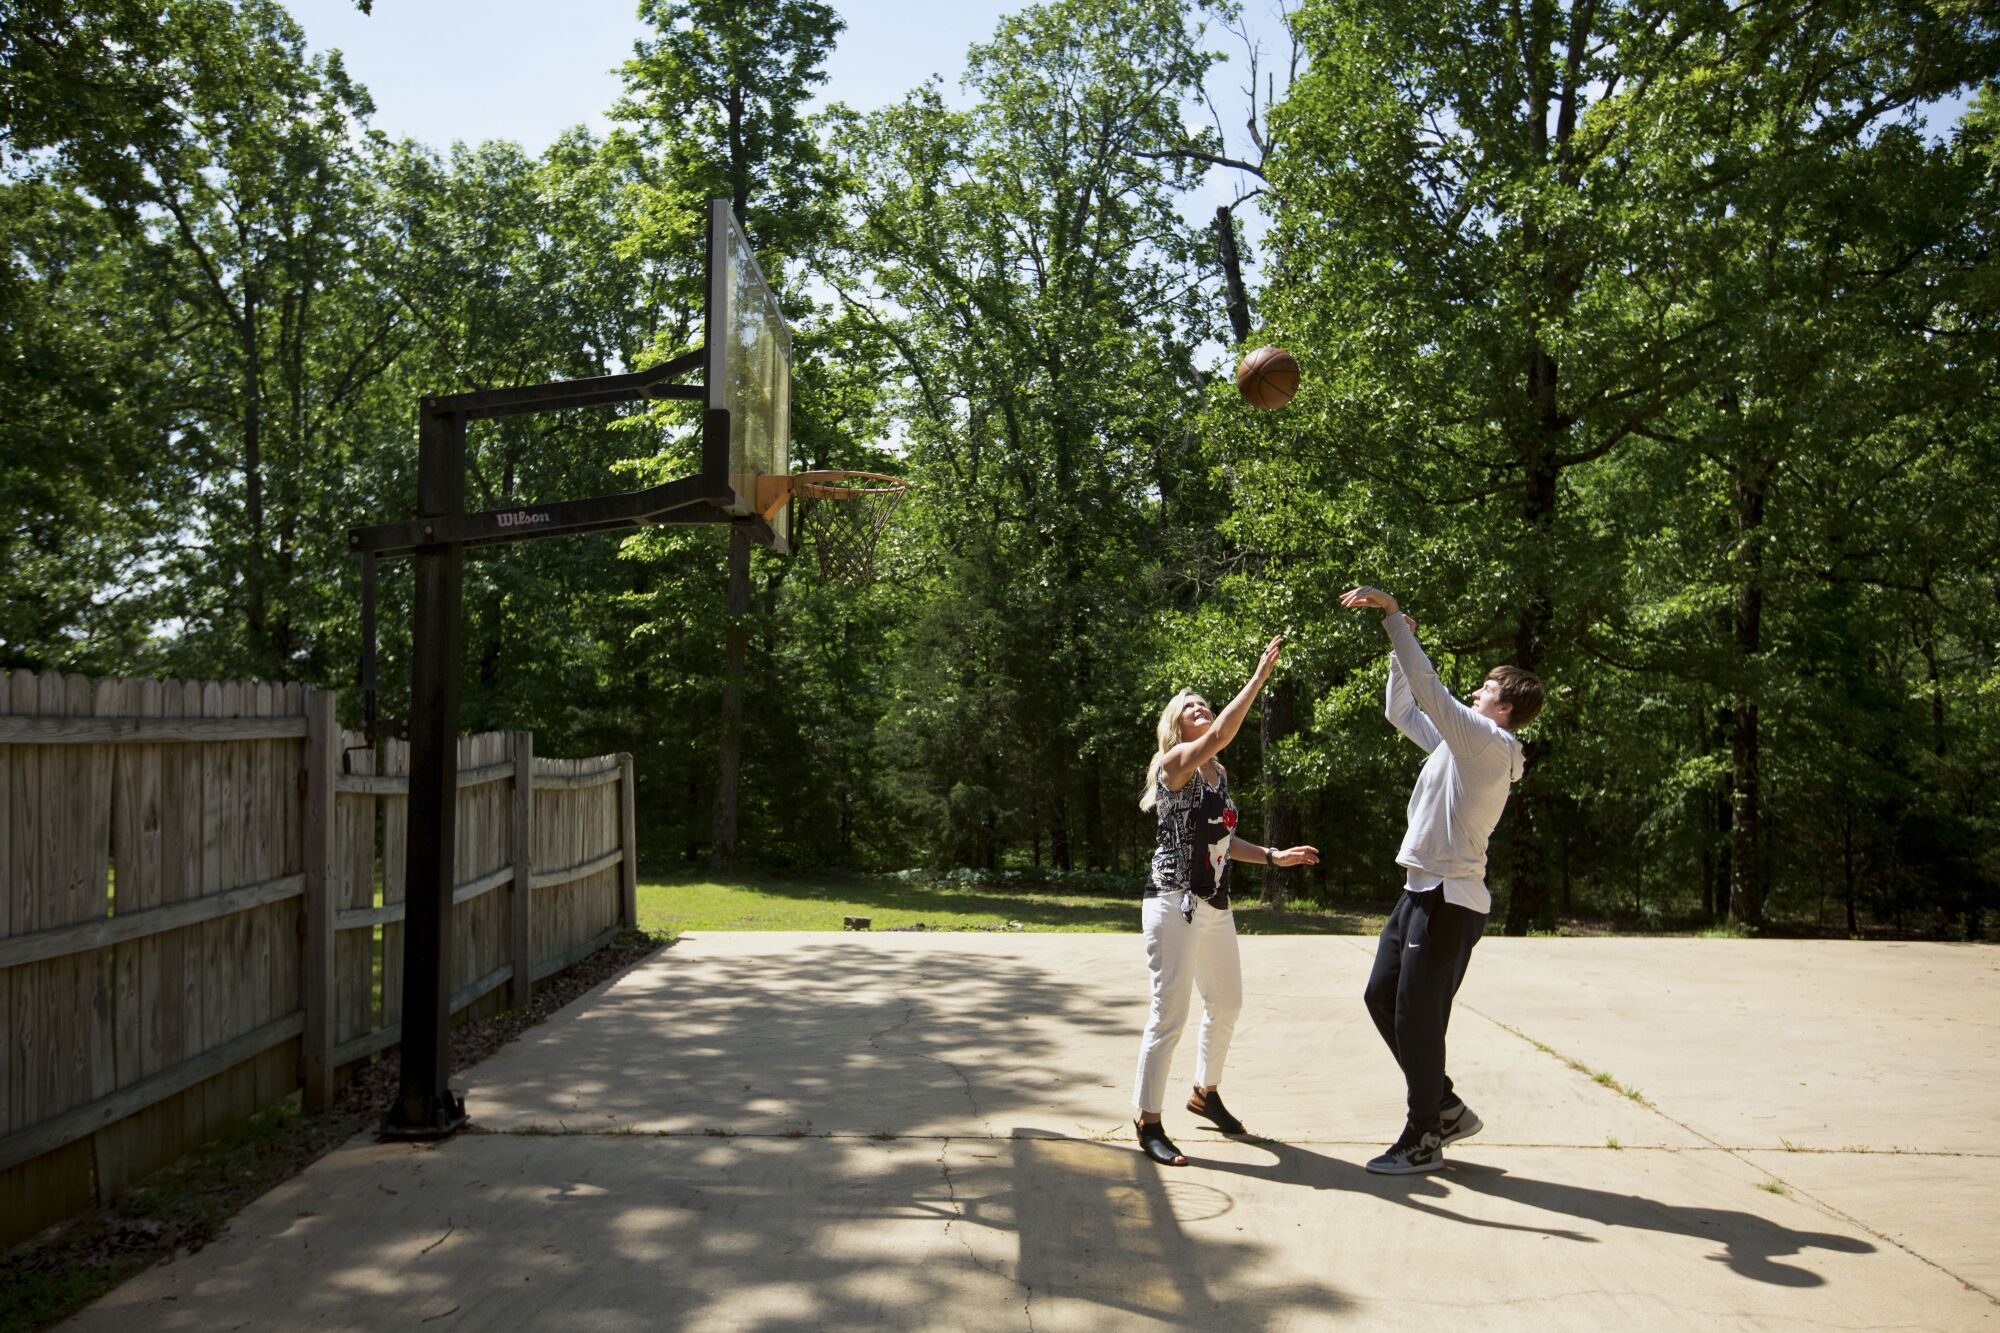 Austin Reaves shoots over his mother, Nicole Wilkett, on a half-court next to the family's house on a 300-acre farm.